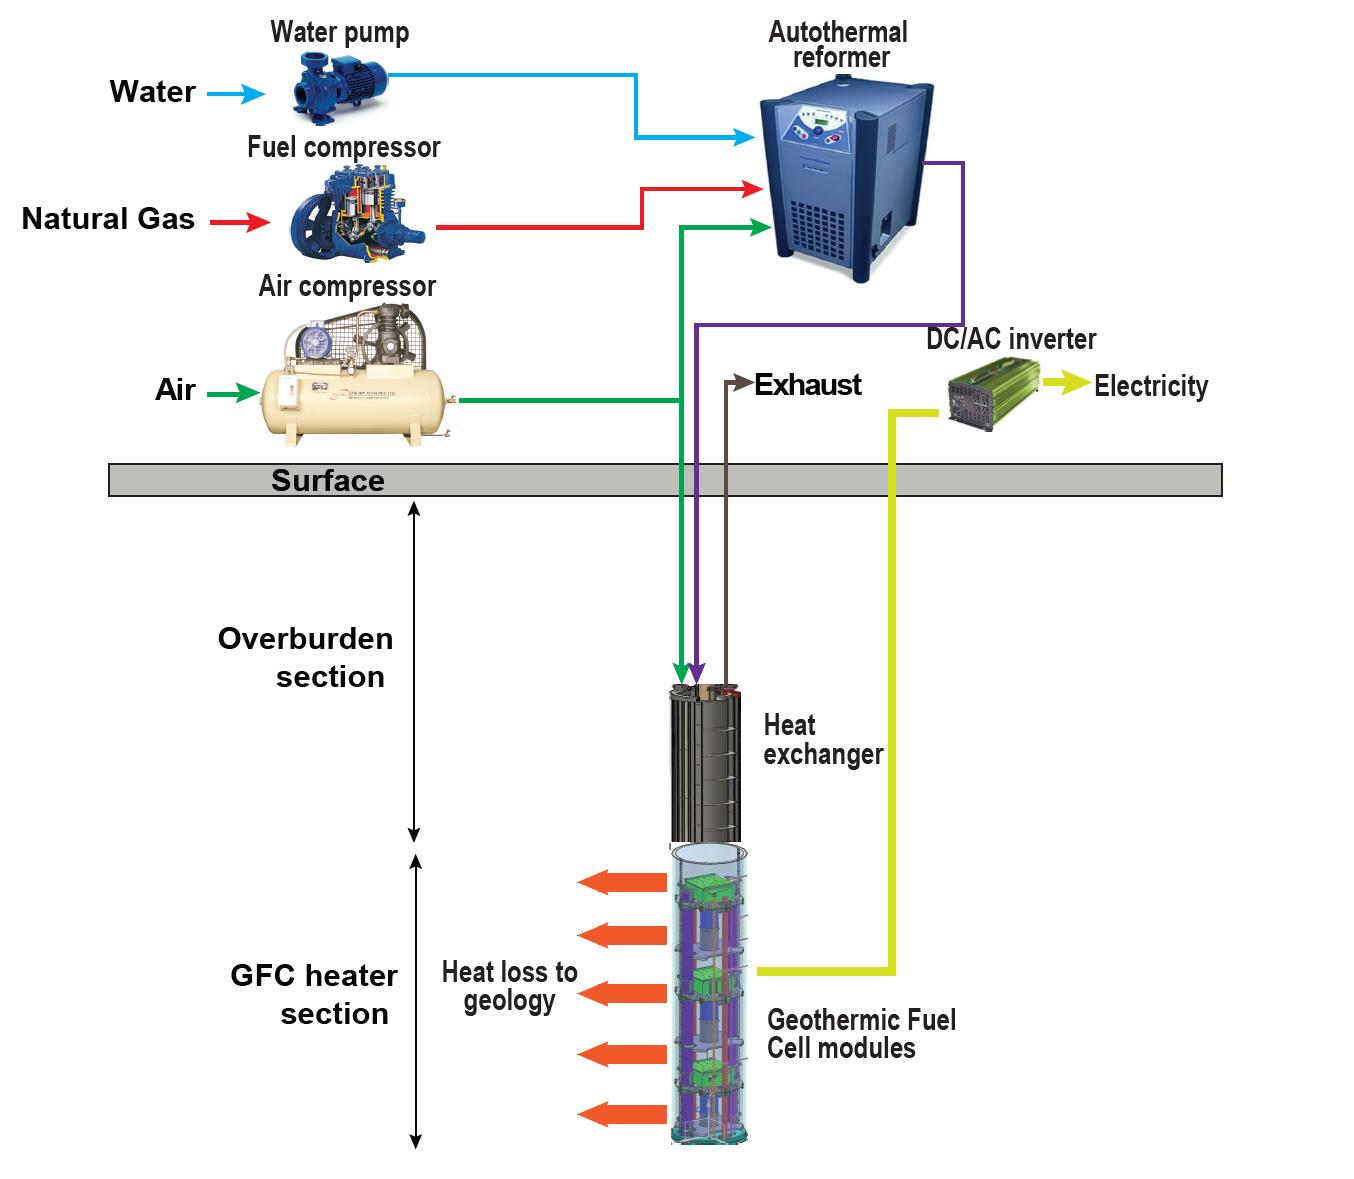 Diagram of geothermic fuel cells process